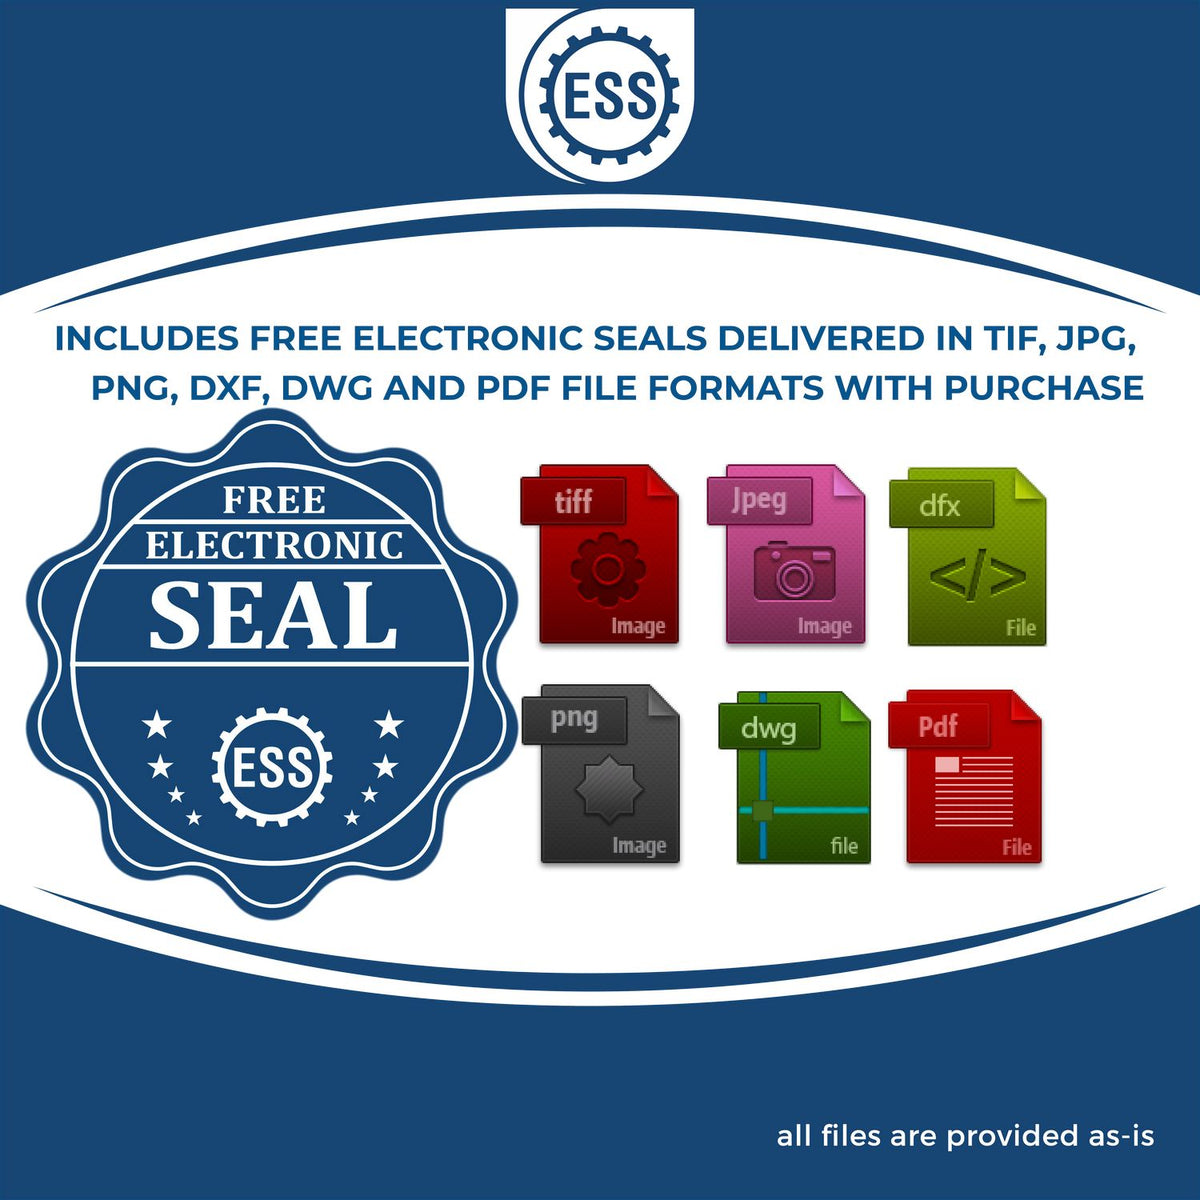 An infographic for the free electronic seal for the Gift Alabama Land Surveyor Seal illustrating the different file type icons such as DXF, DWG, TIF, JPG and PNG.